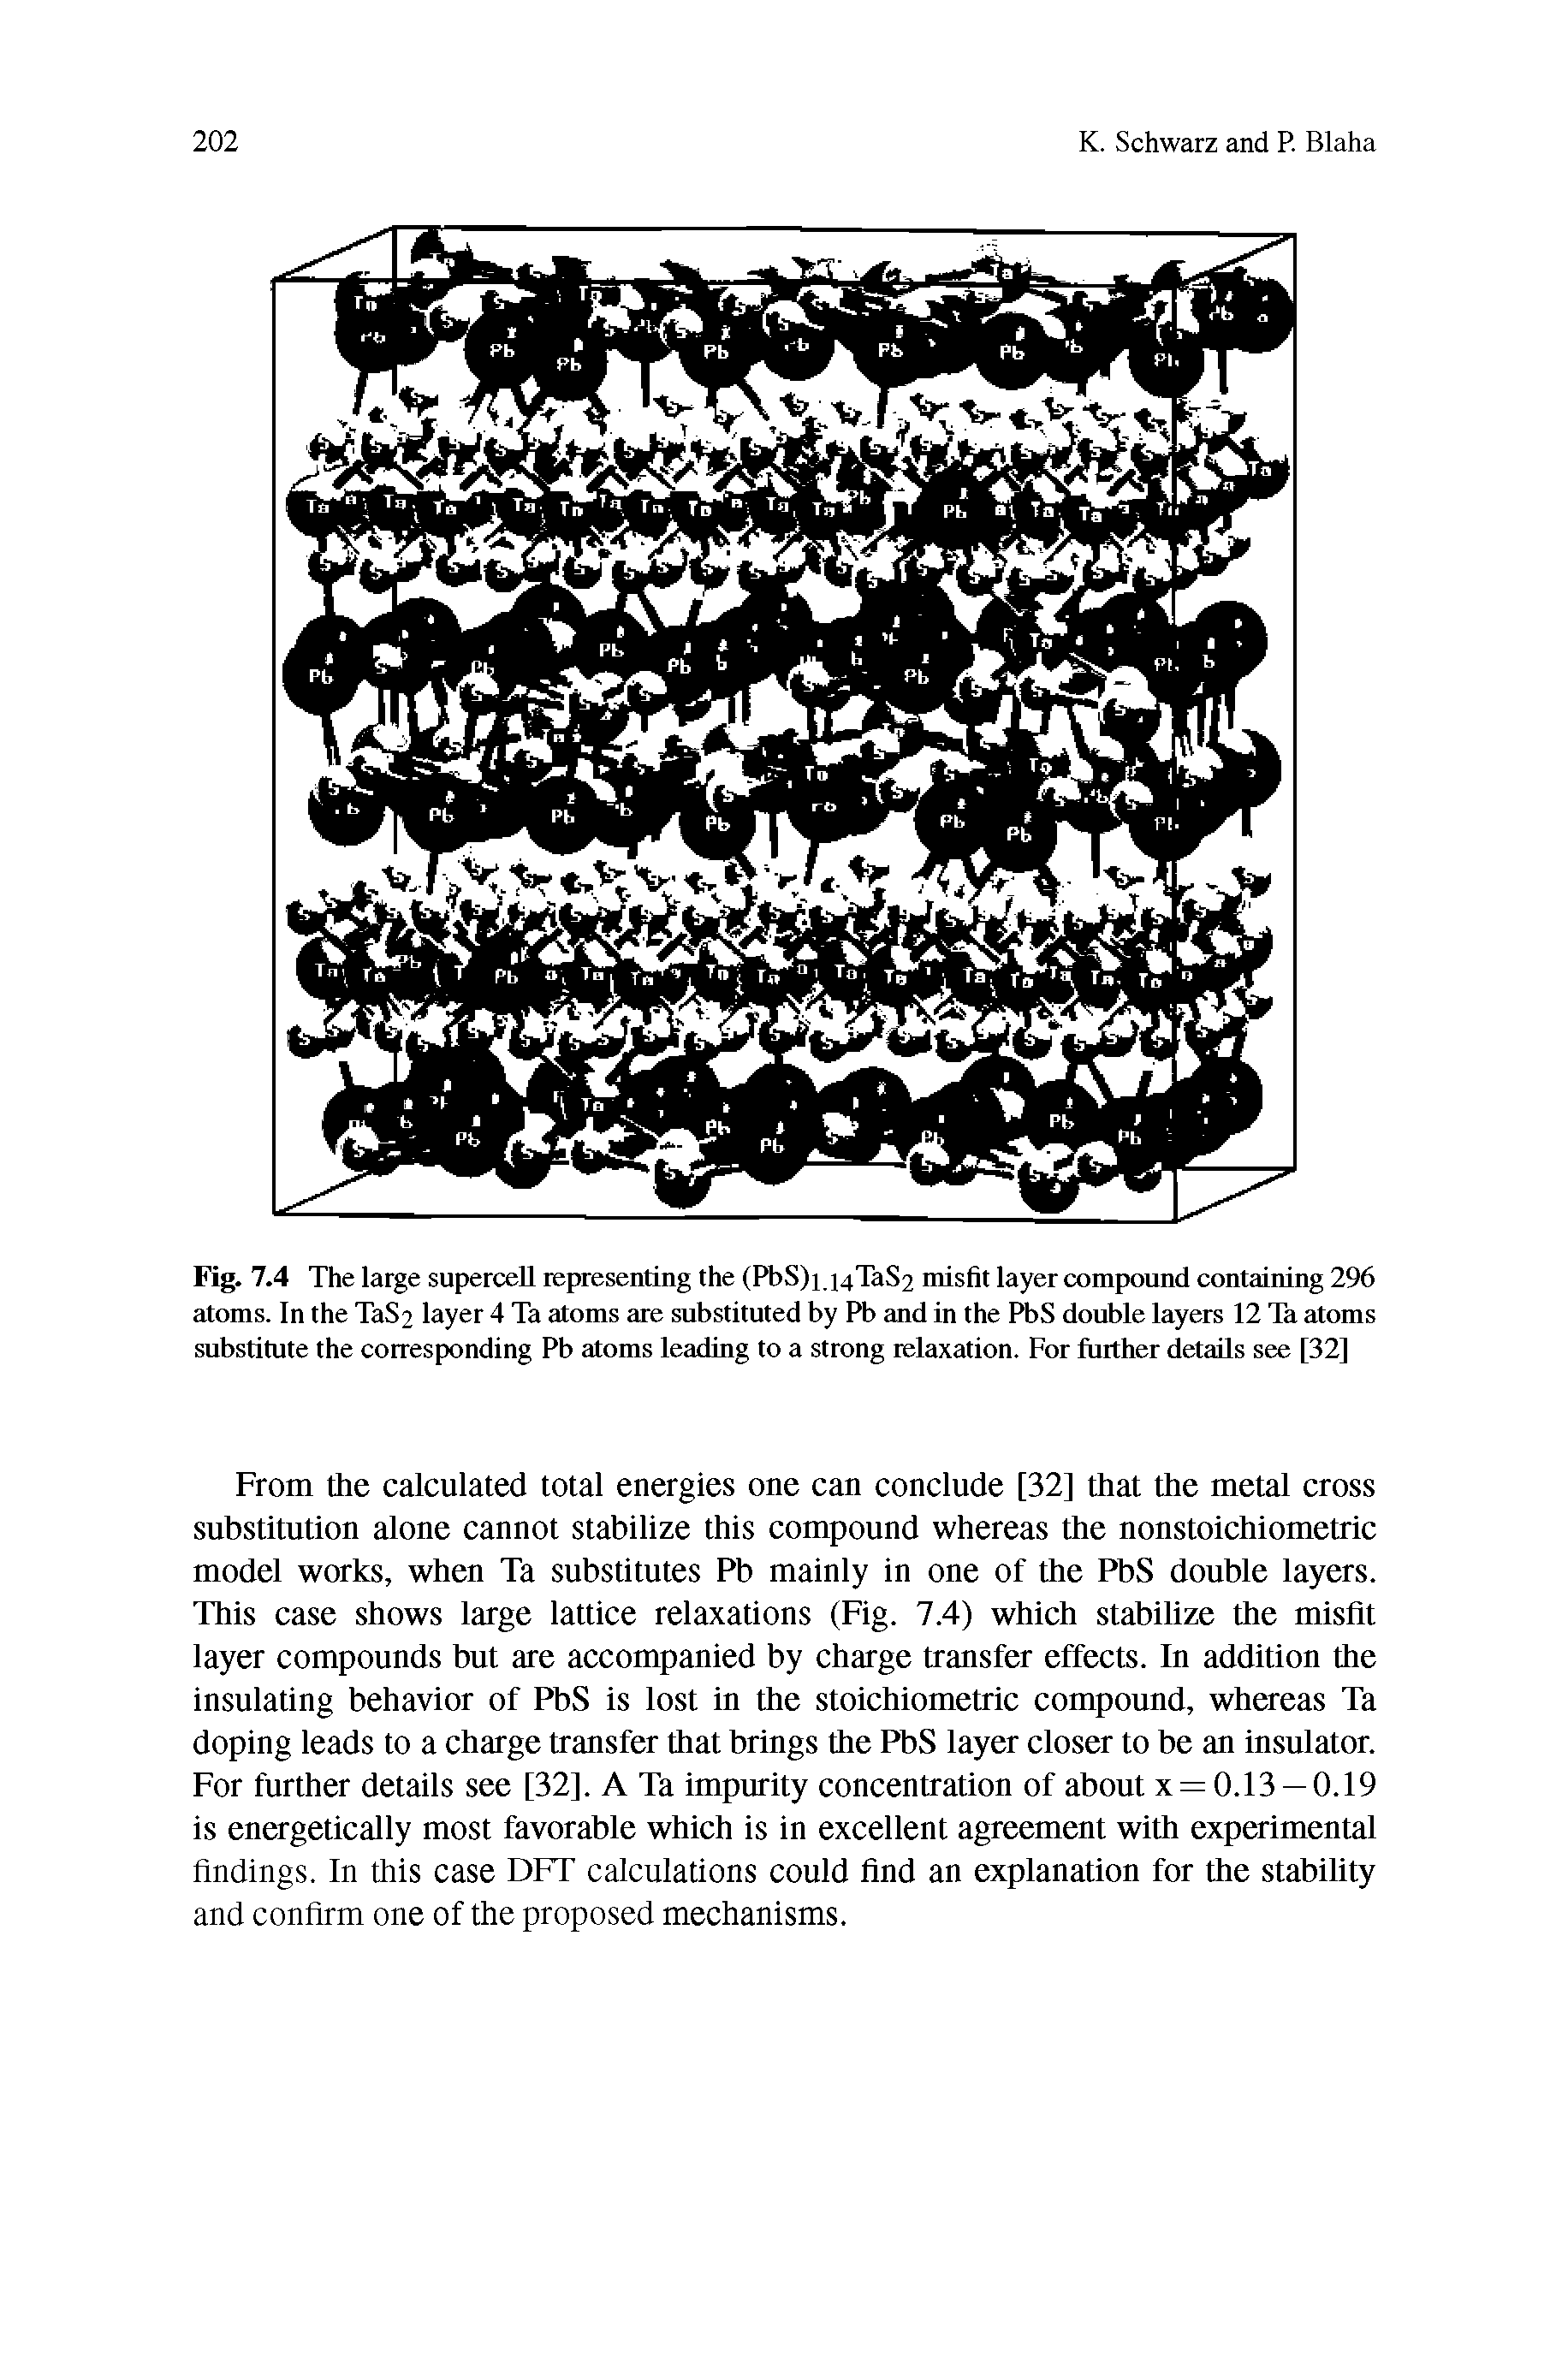 Fig. 7.4 The large supercell representing the (PbS)i.14X382 misfit layer compound containmg 296 atoms. In the TaS2 layer 4 Ta atoms are substituted by Pb and in the PbS double layers 12 Ta atoms substitute the corresponding Pb atoms leading to a strong relaxation. For further details see [32]...